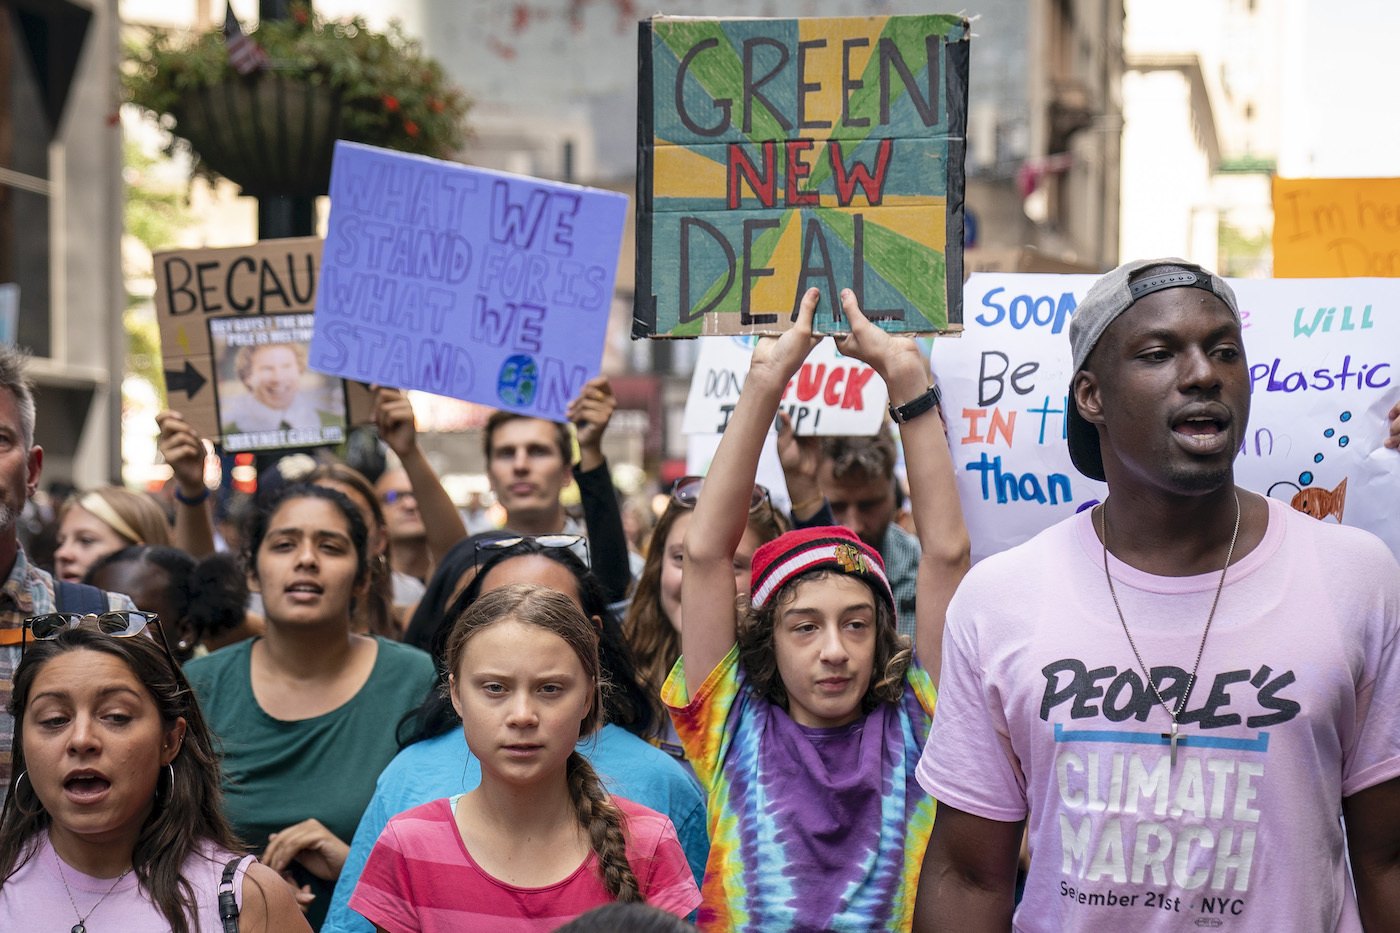 The next generation of climate activists won’t be underestimated